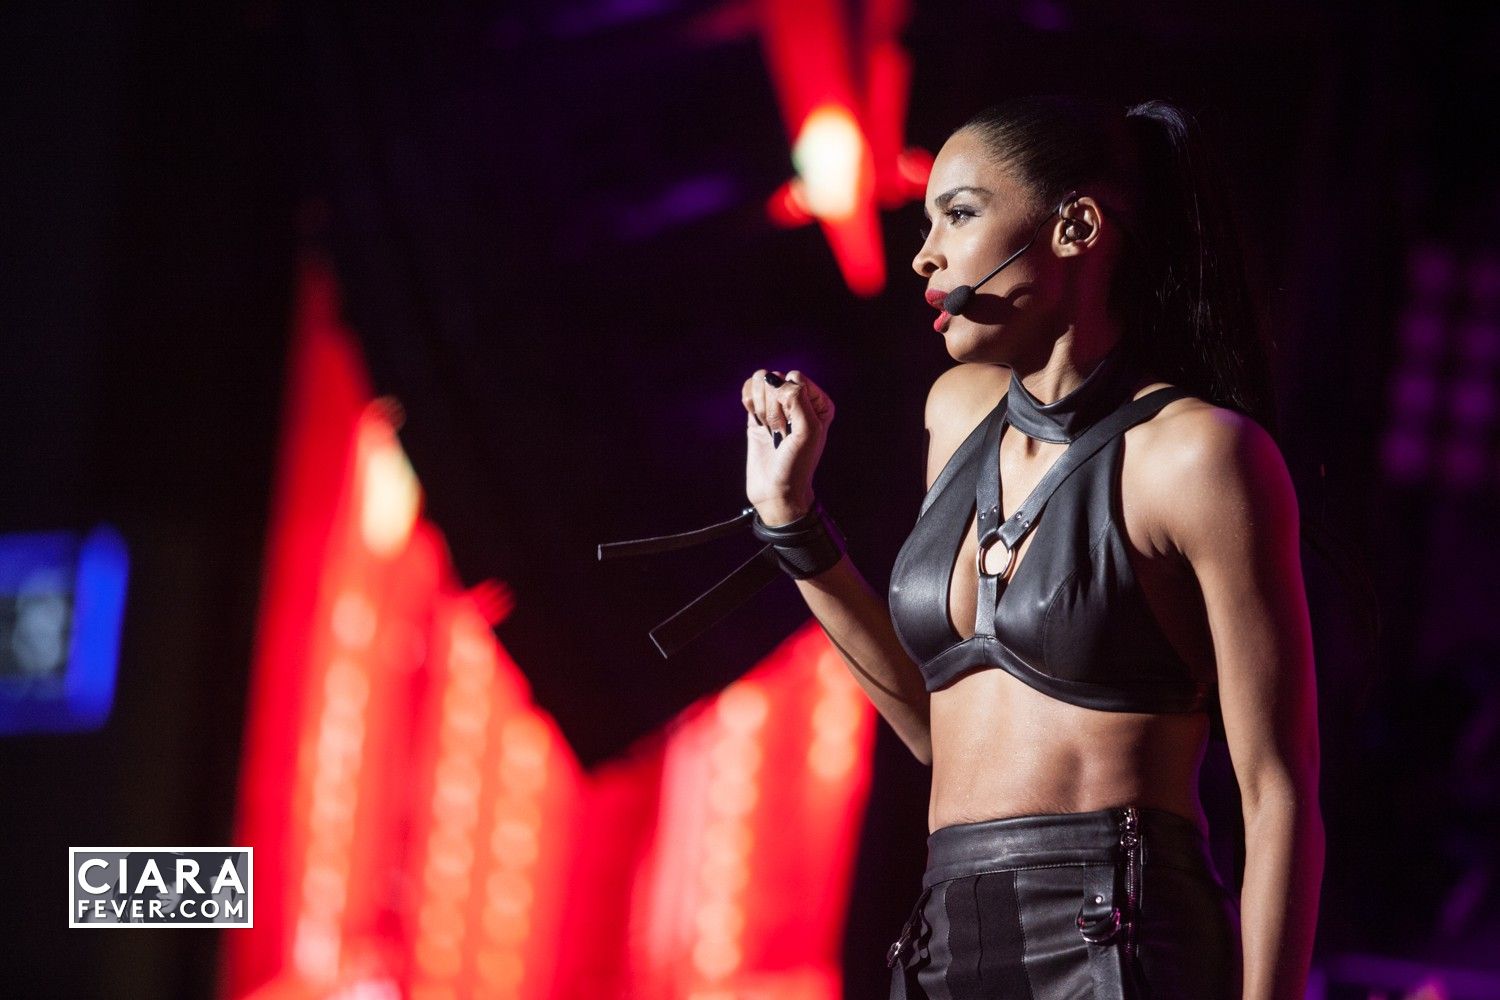 Ciara performs at the AT&T Playoff Playlist